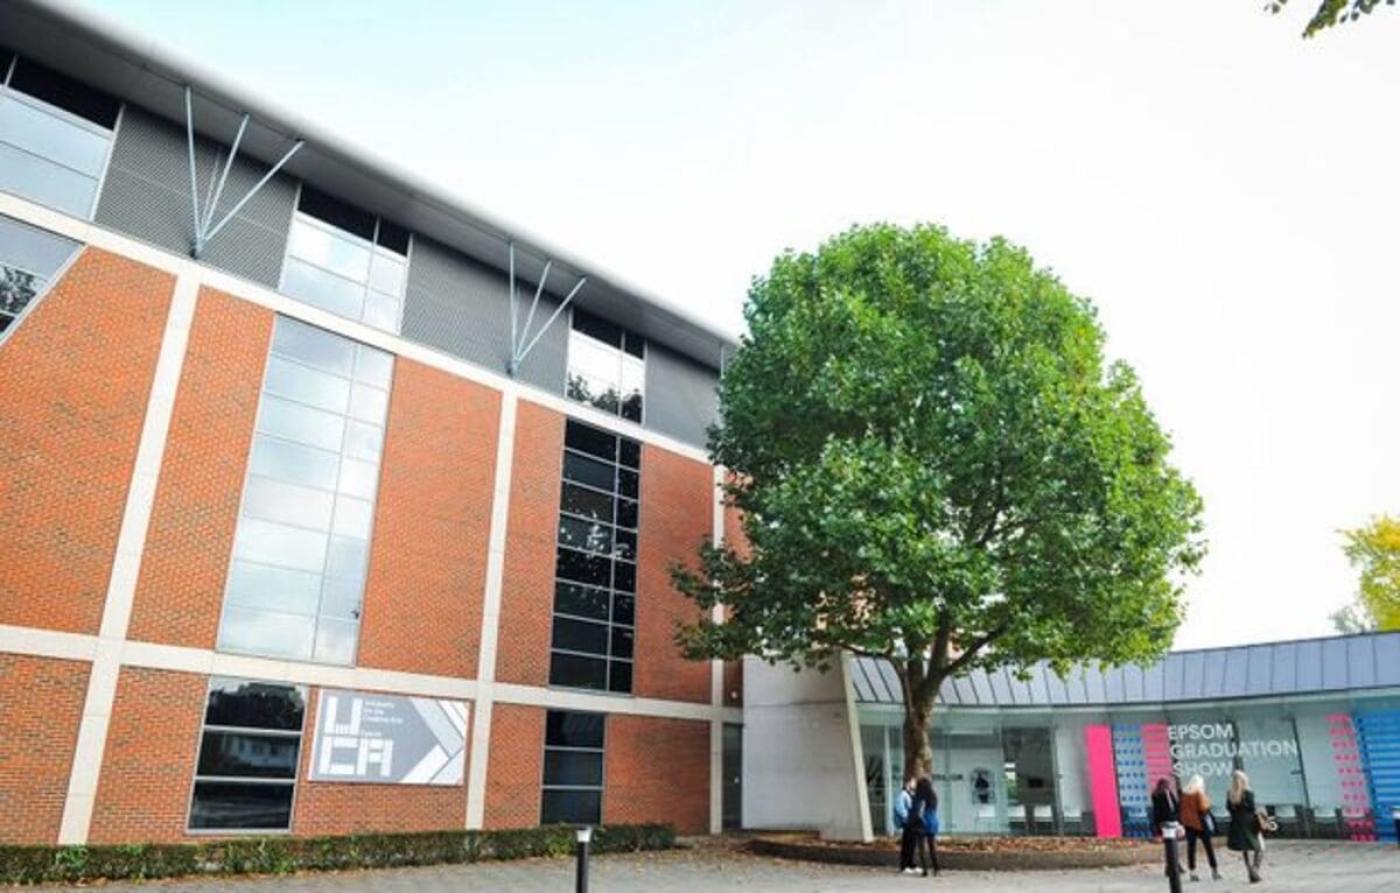 Global University Systems (GUS) - University for the Creative Arts - Farnham Campus